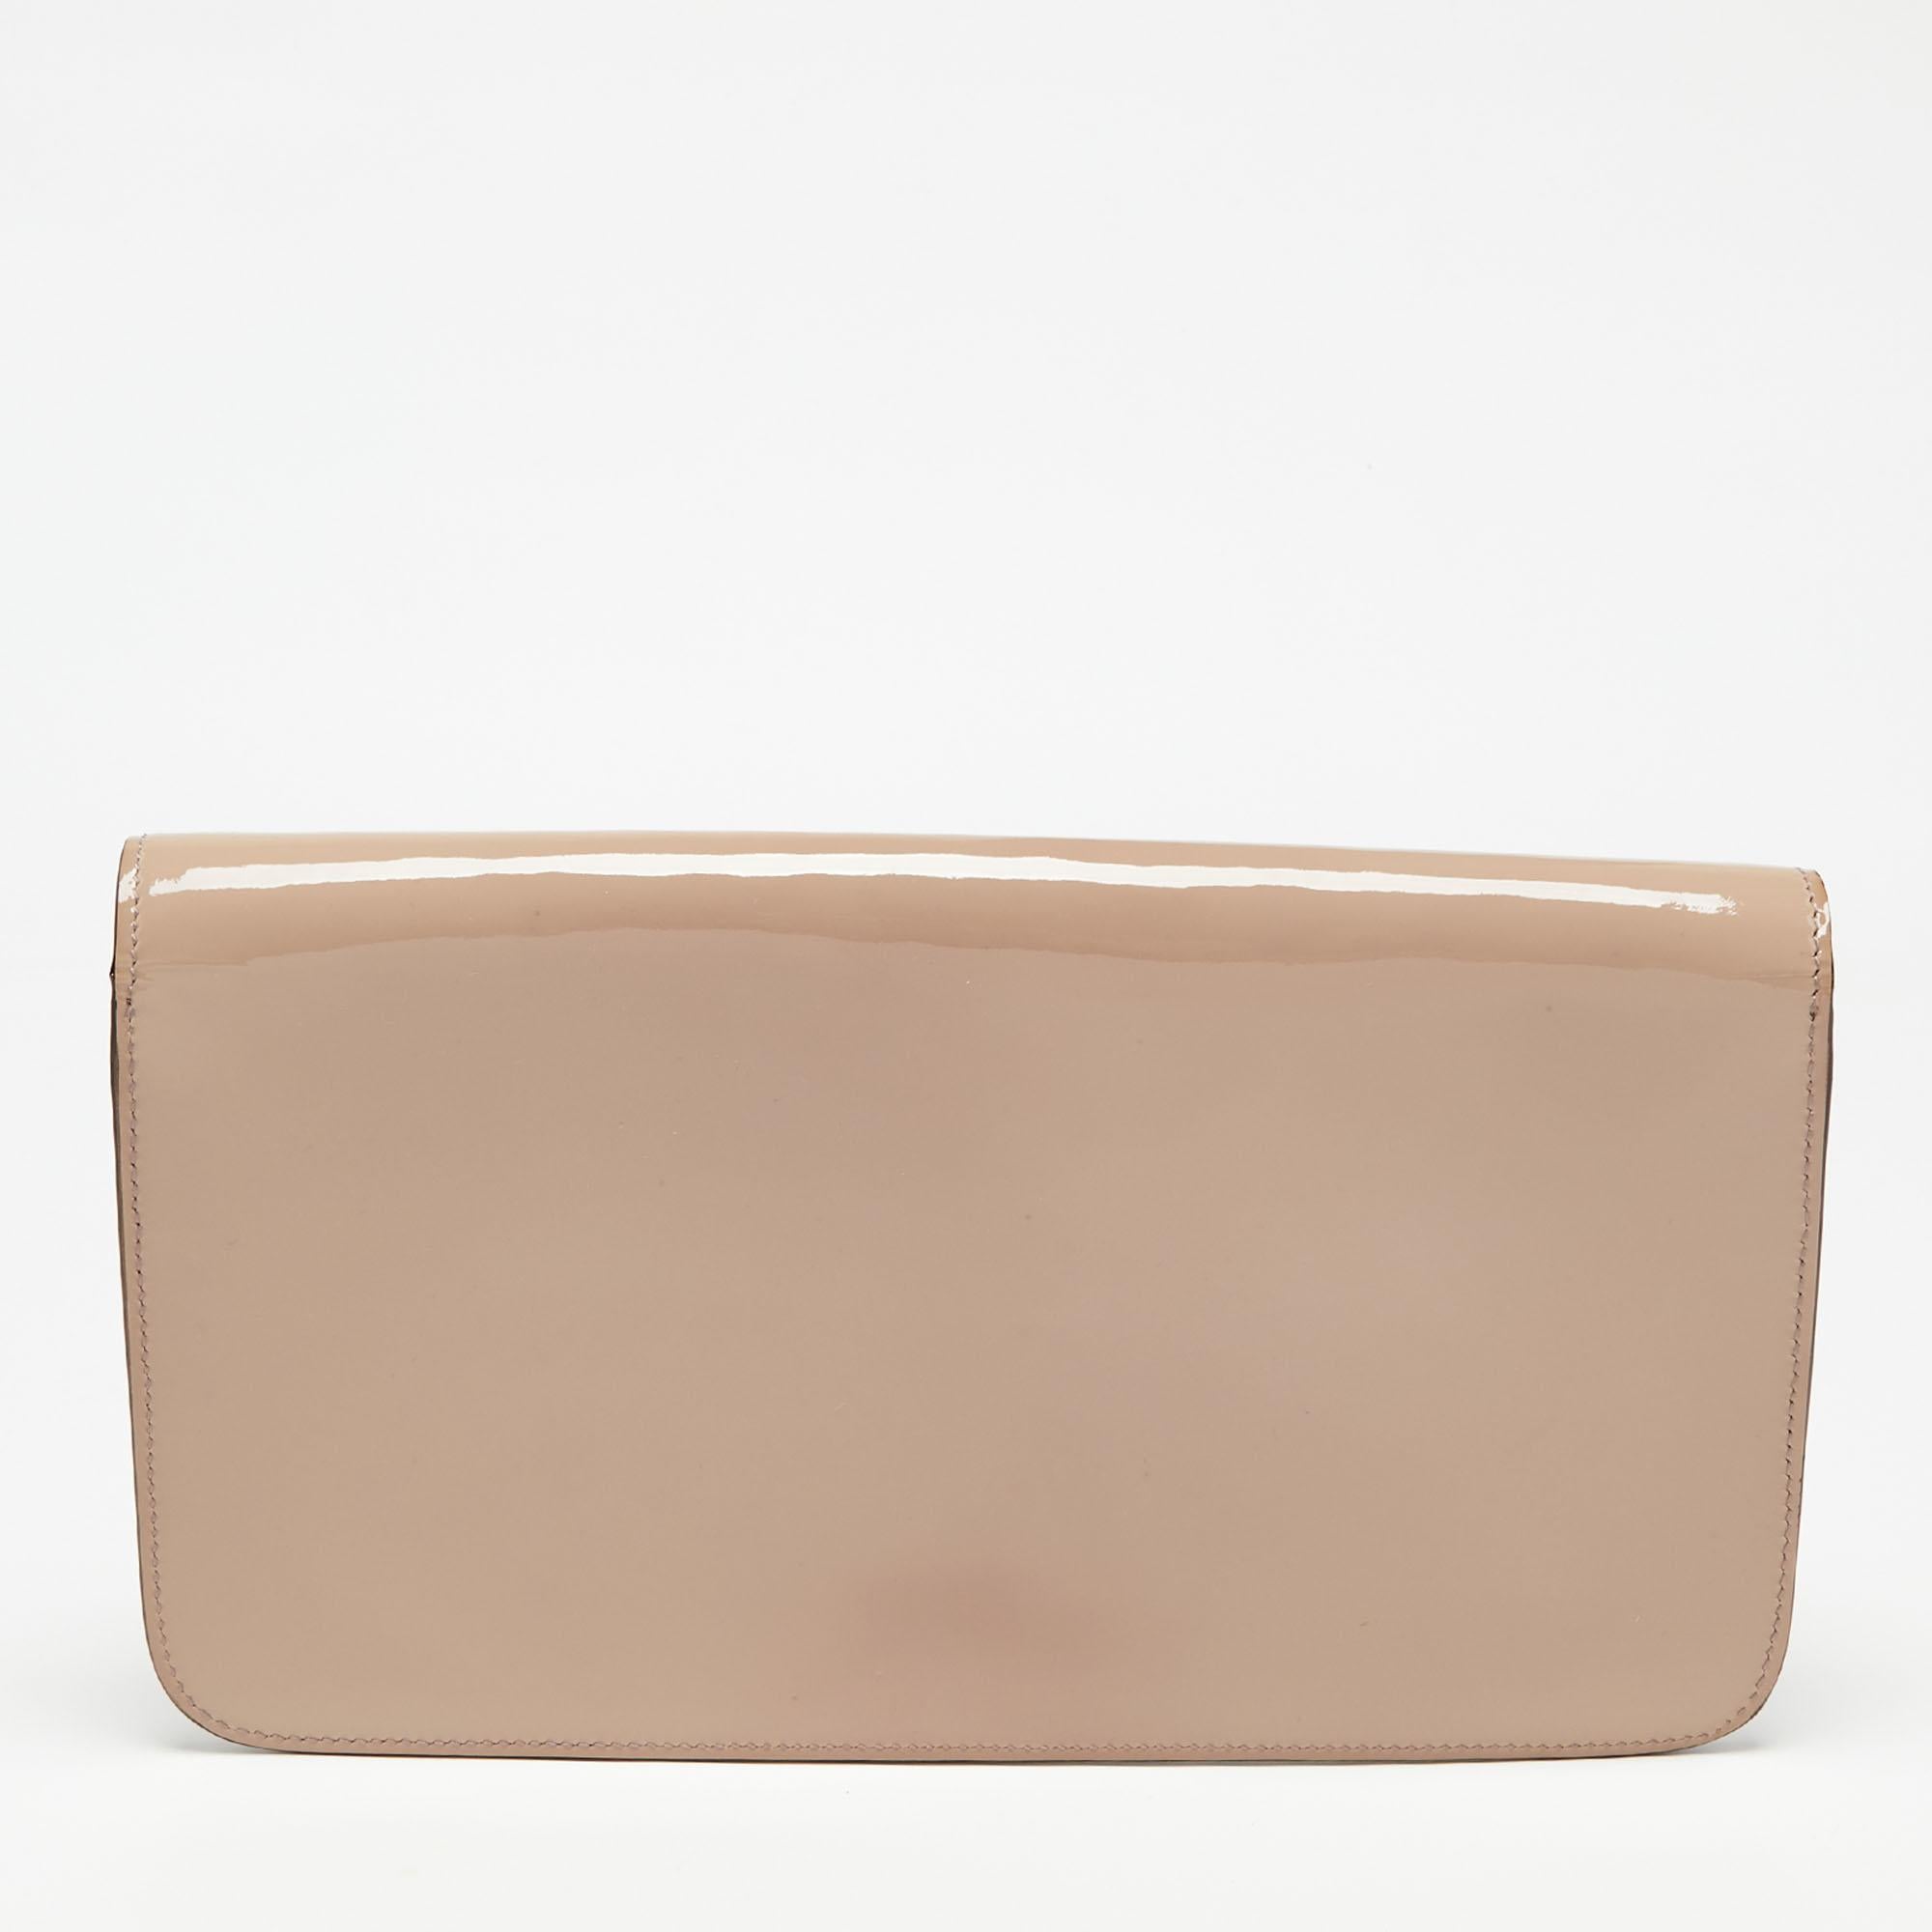 This Bright Bit clutch from Gucci proves that style can come in simple things too. Crafted from patent leather, this lovely beige clutch features a canvas-lined interior and is equipped with the signature Horsebit on the front. This creation is